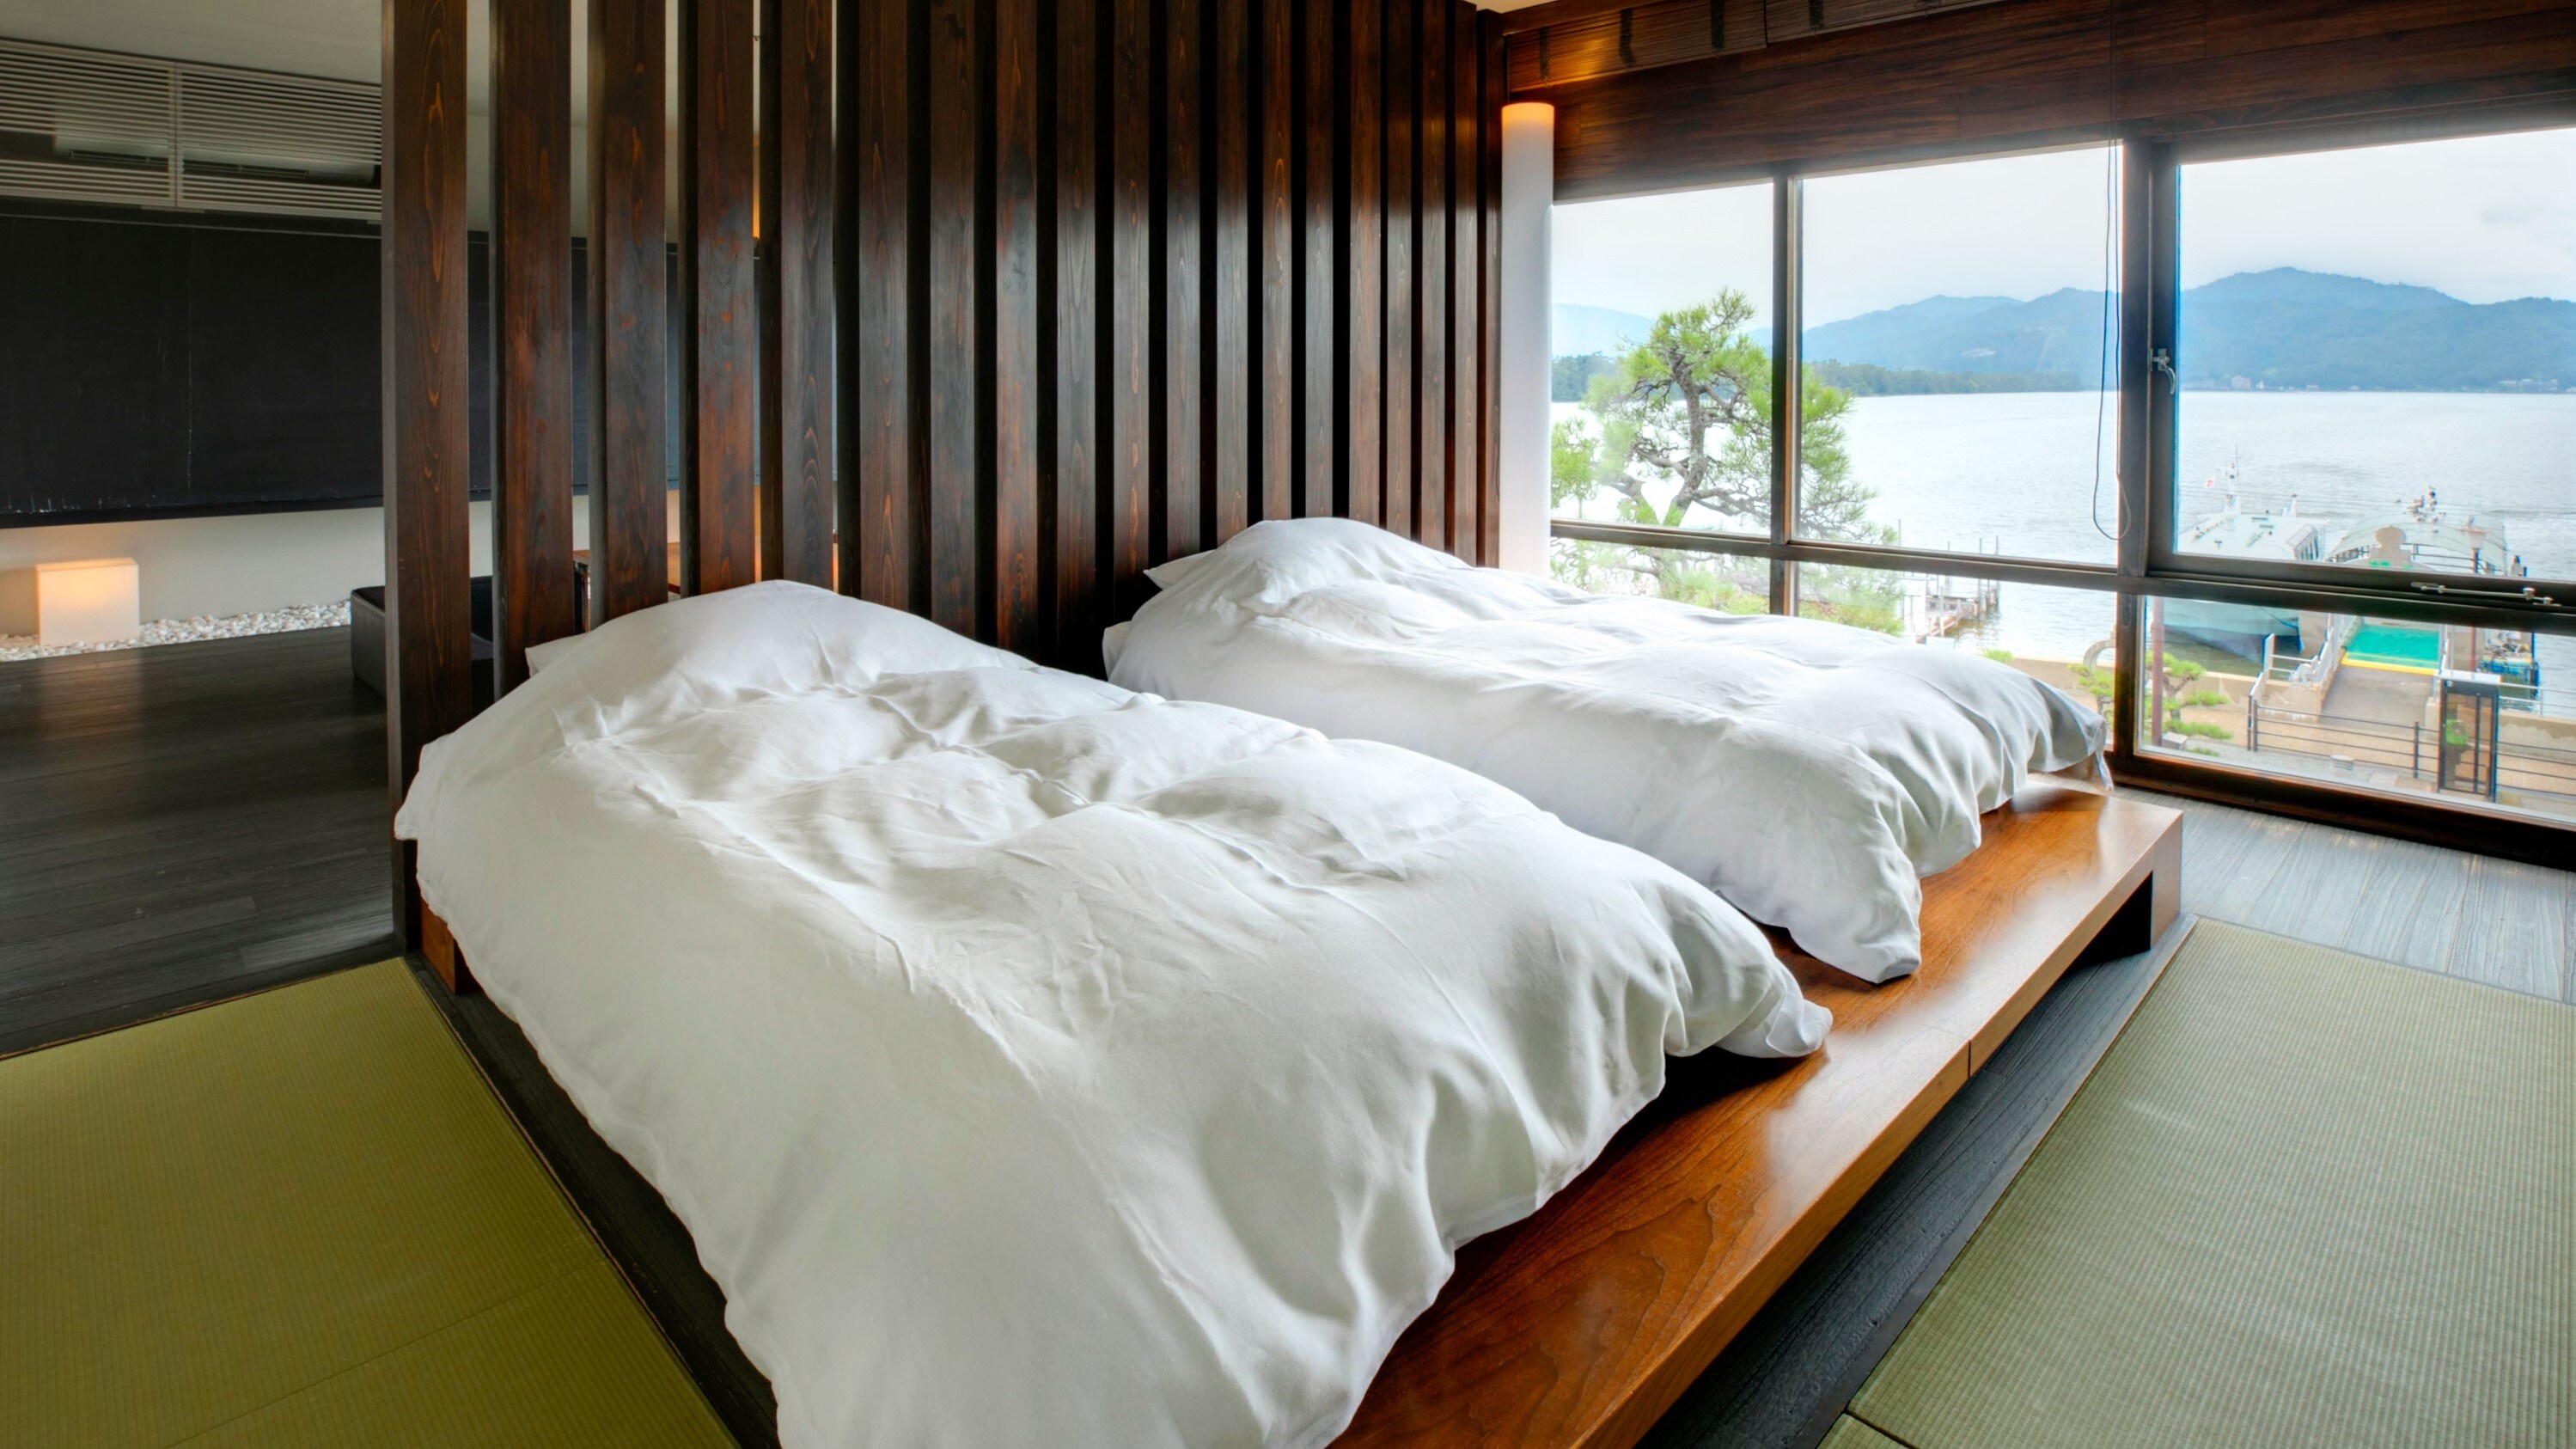 [3rd floor ◆ Japanese and Western room] The view of Heavenly Hashidate, which you can see while sitting on the "10,000 shaku" bed, is superb.